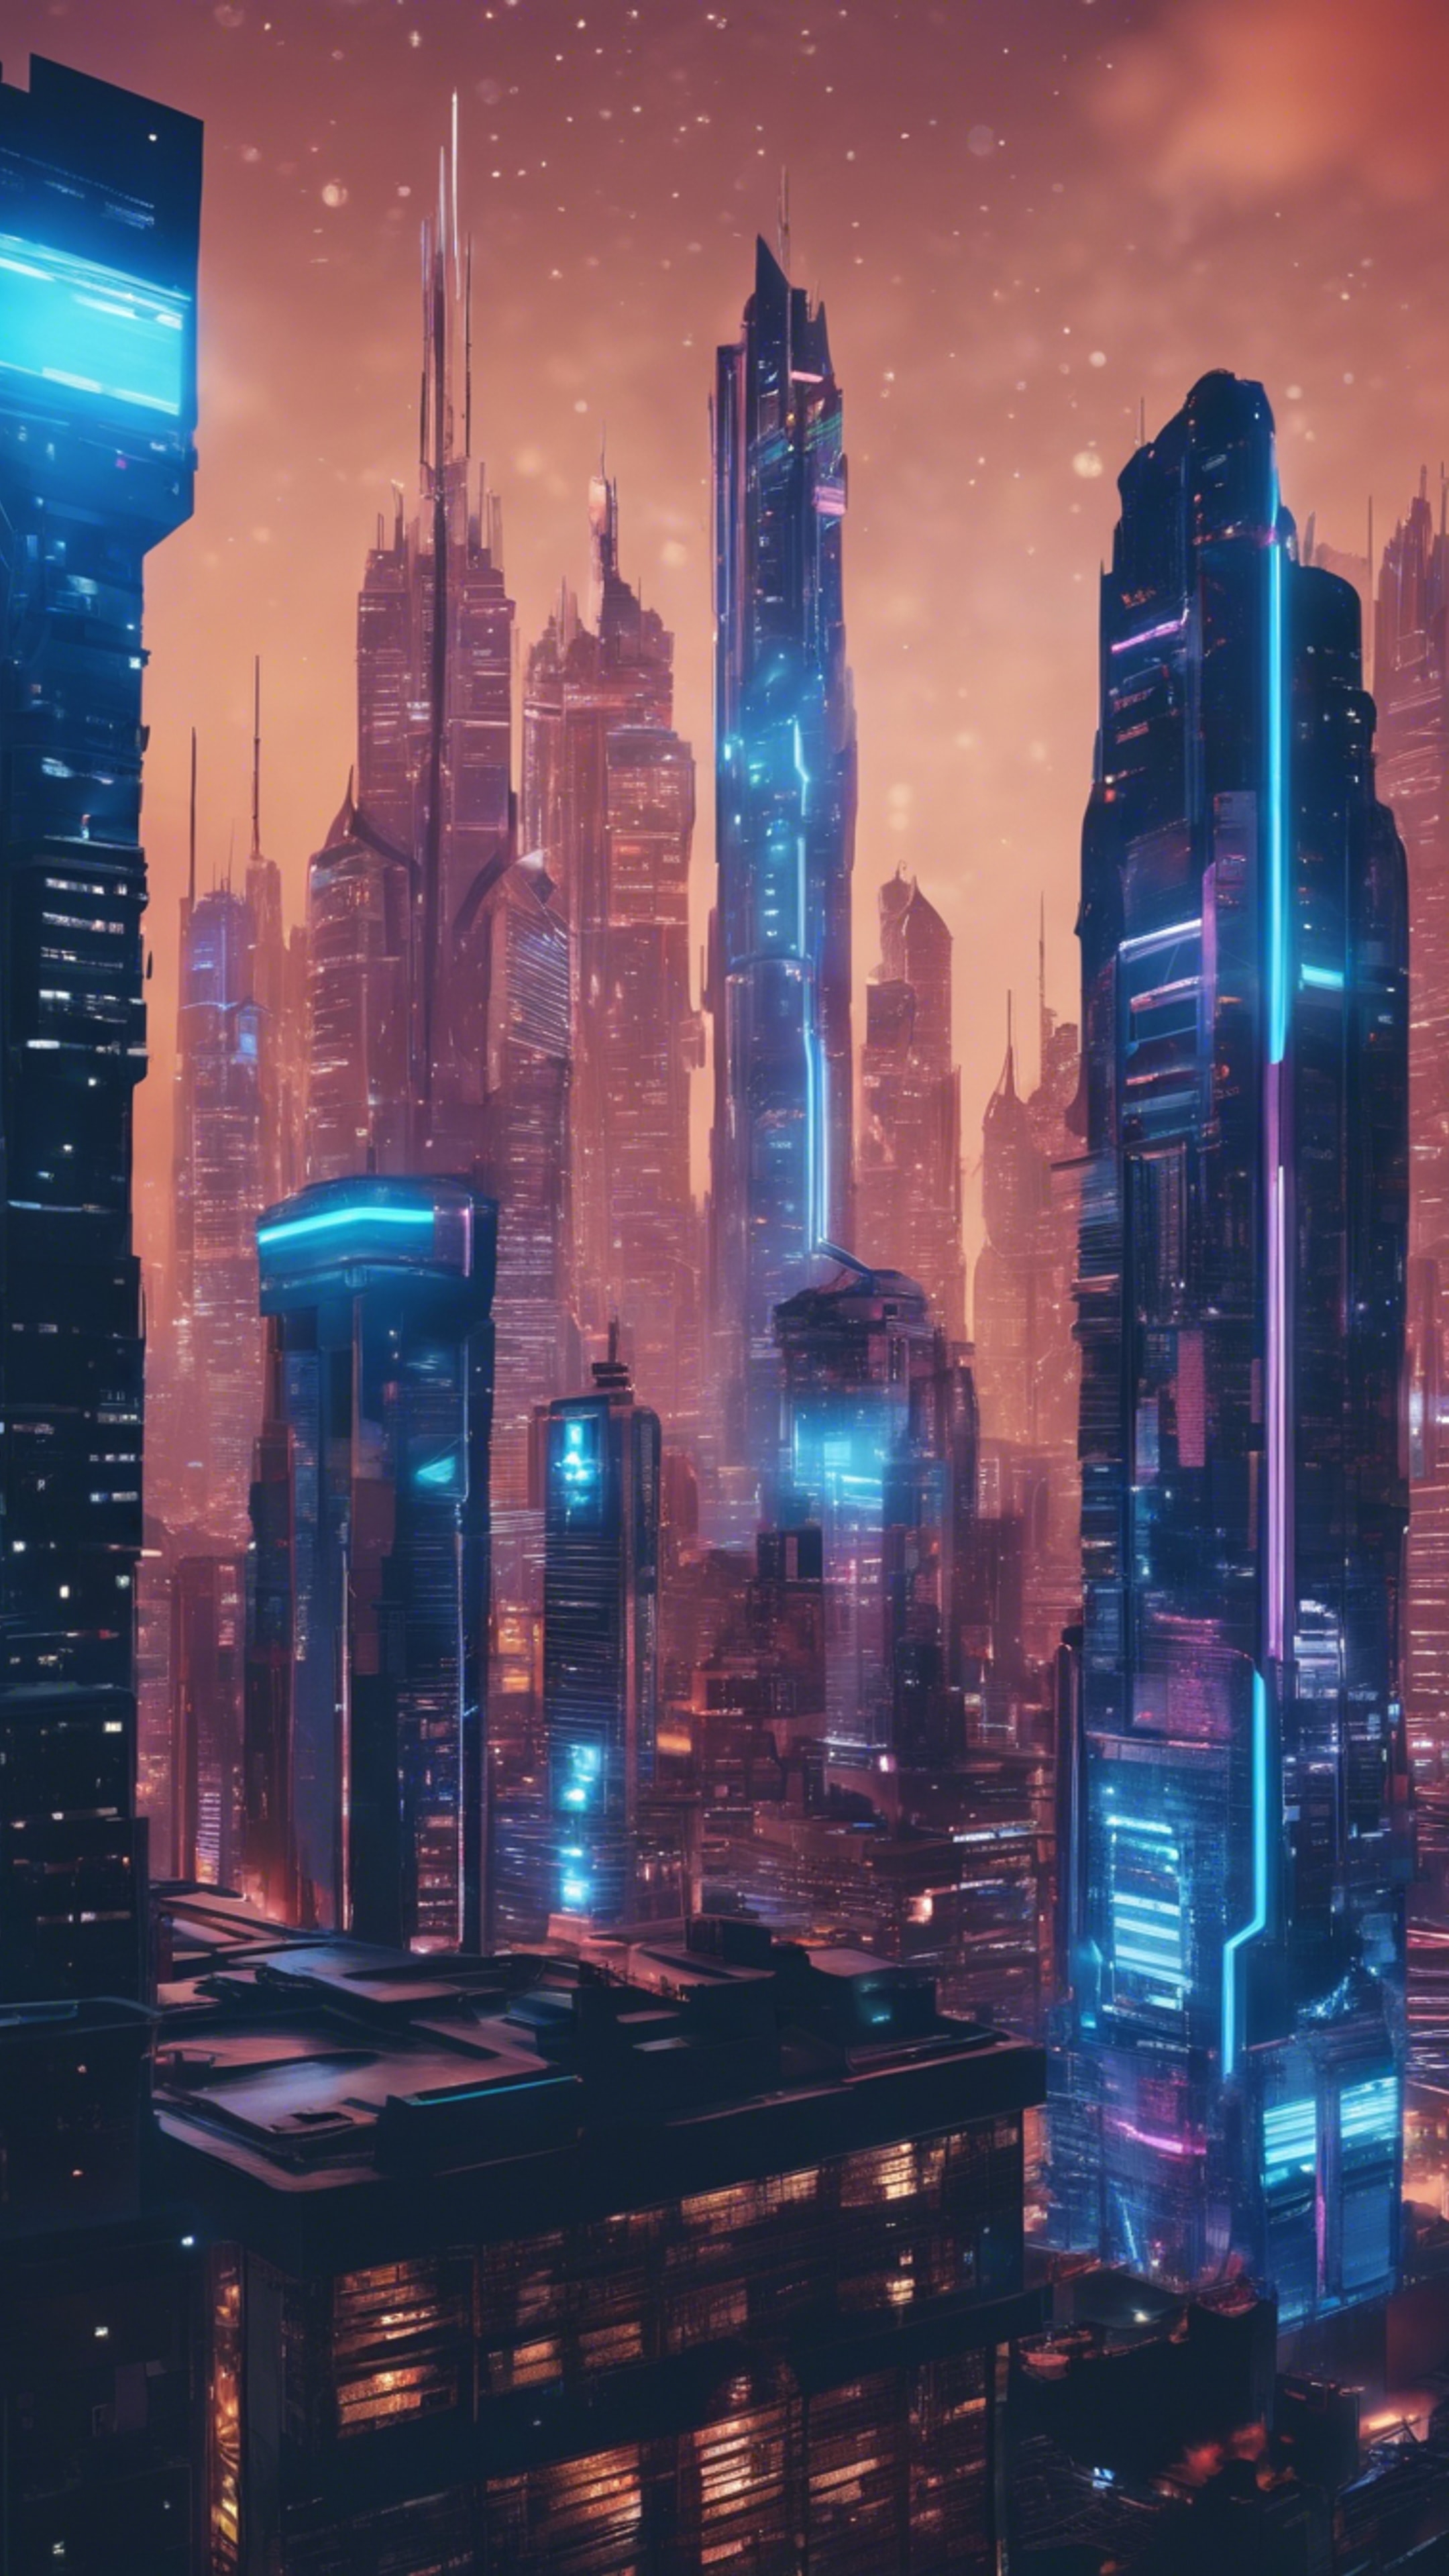 A futuristic city glowing with vibrant neon-blue lights and skyscrapers piercing the night sky. Ταπετσαρία[2f3a3bdee3e14a4e9359]